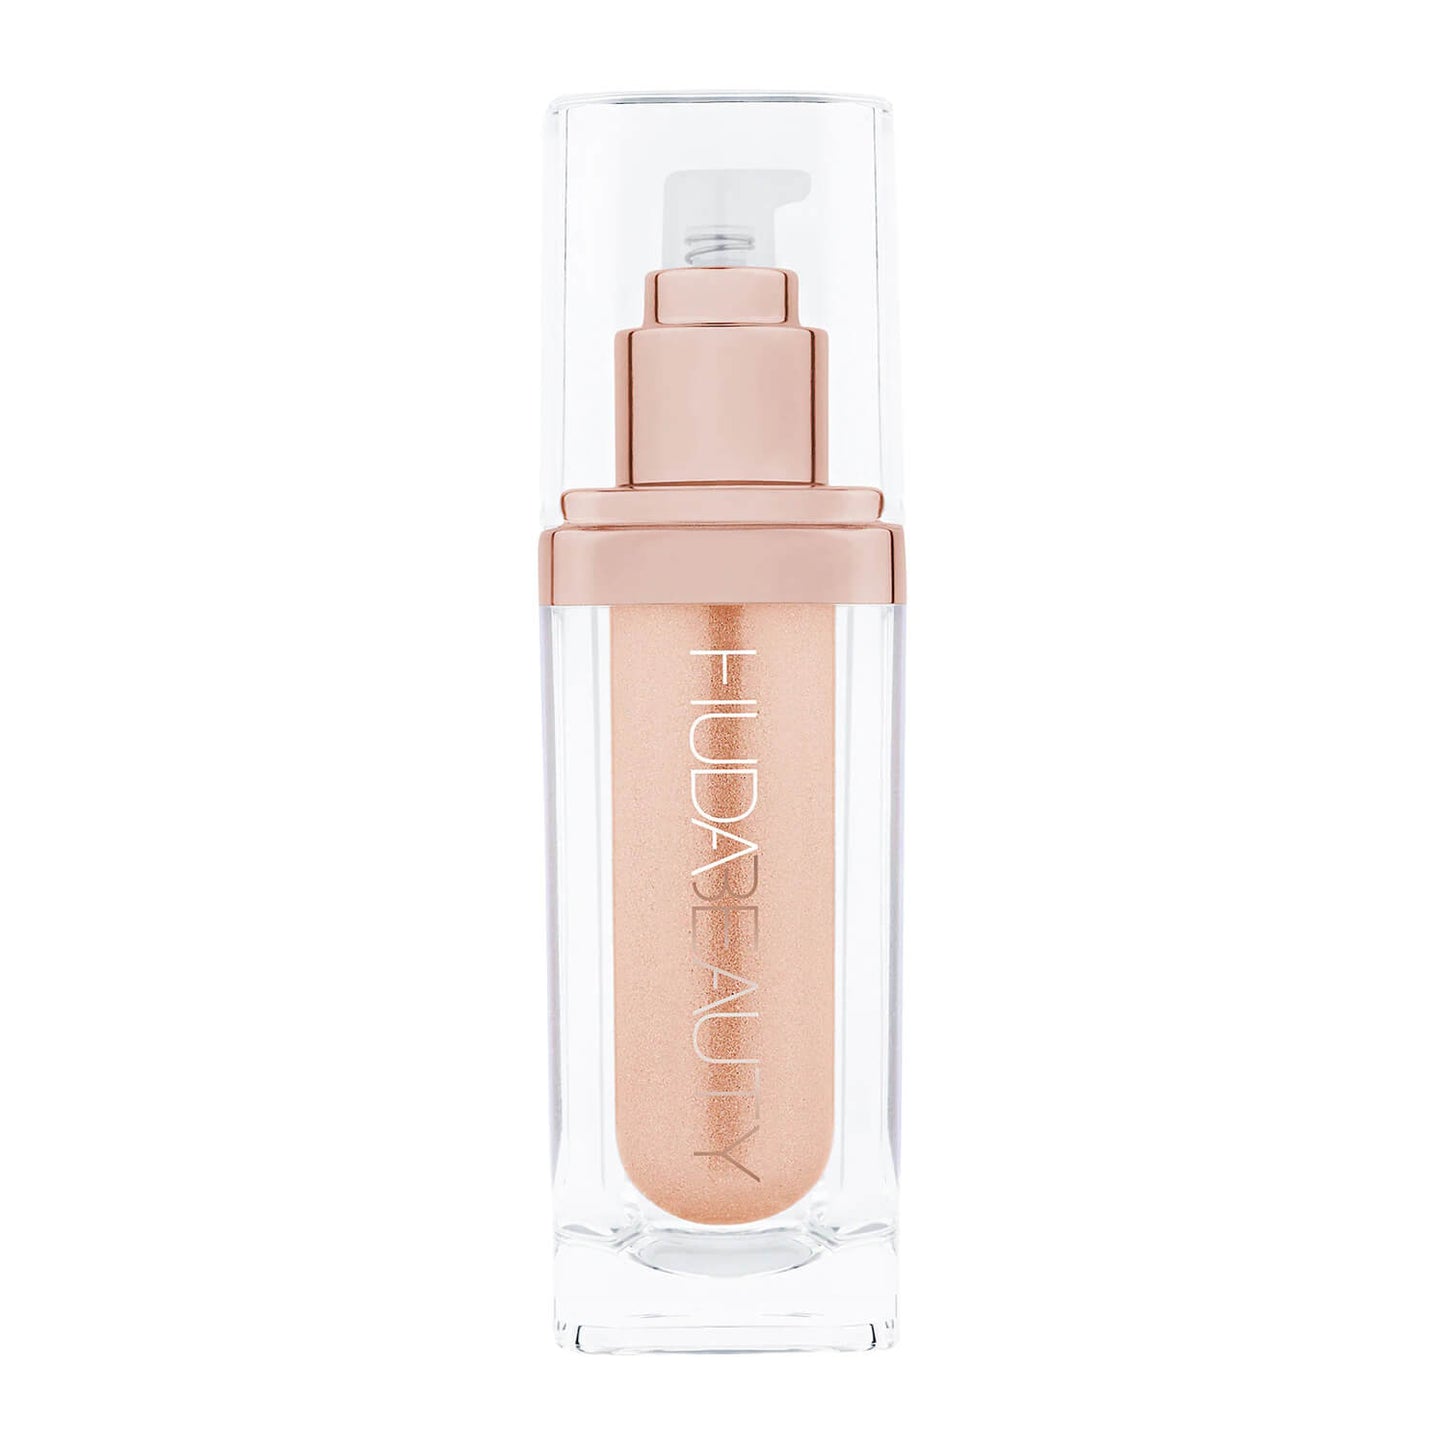 Huda Beauty All Over Body Highlighter Luna available at Heygirl.pk in Karachi, Lahore, Islamabad in Pakistan